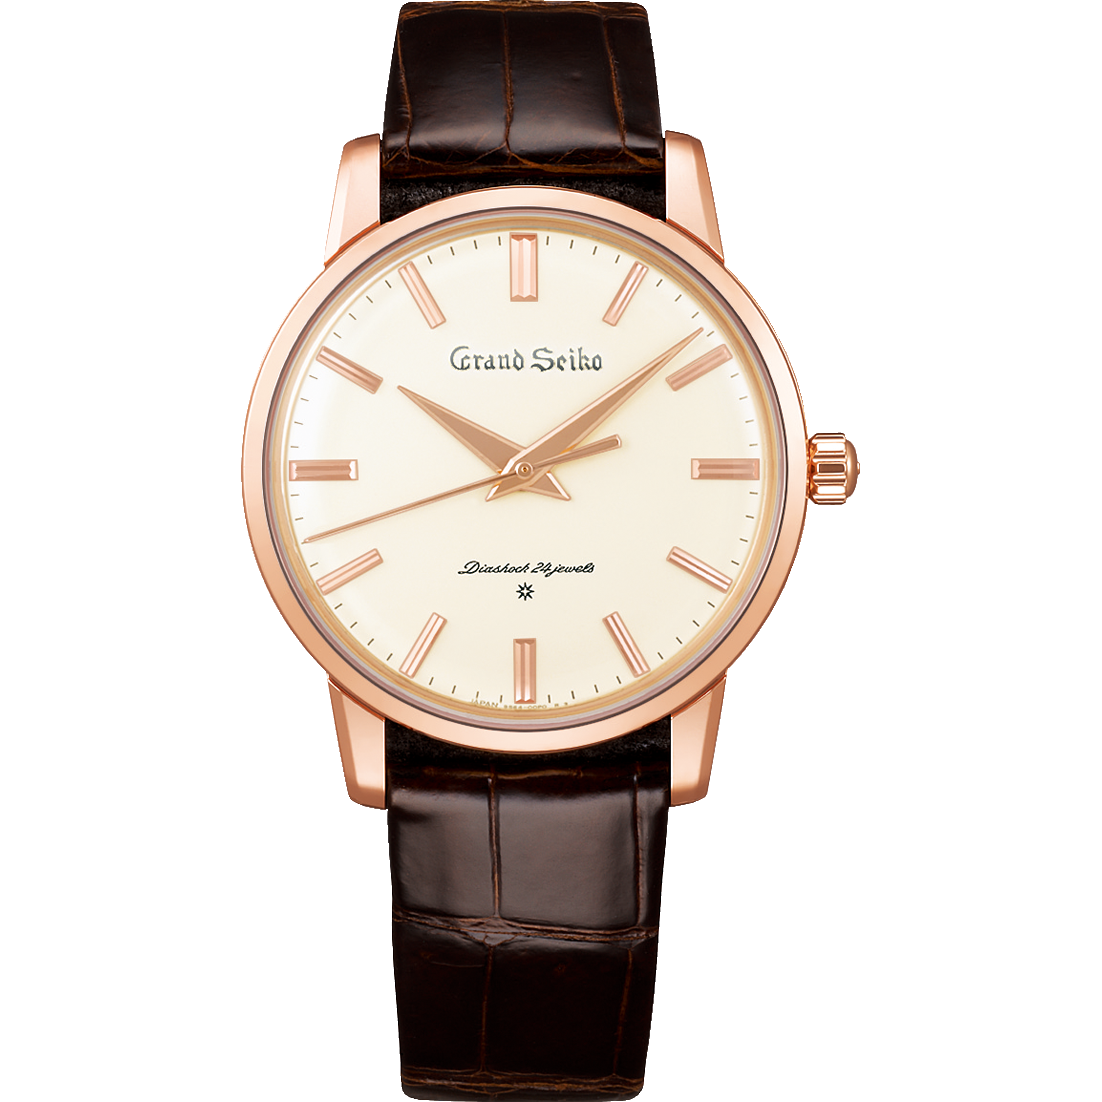 The first Grand Seiko watch, faithfully re-created with an eye to